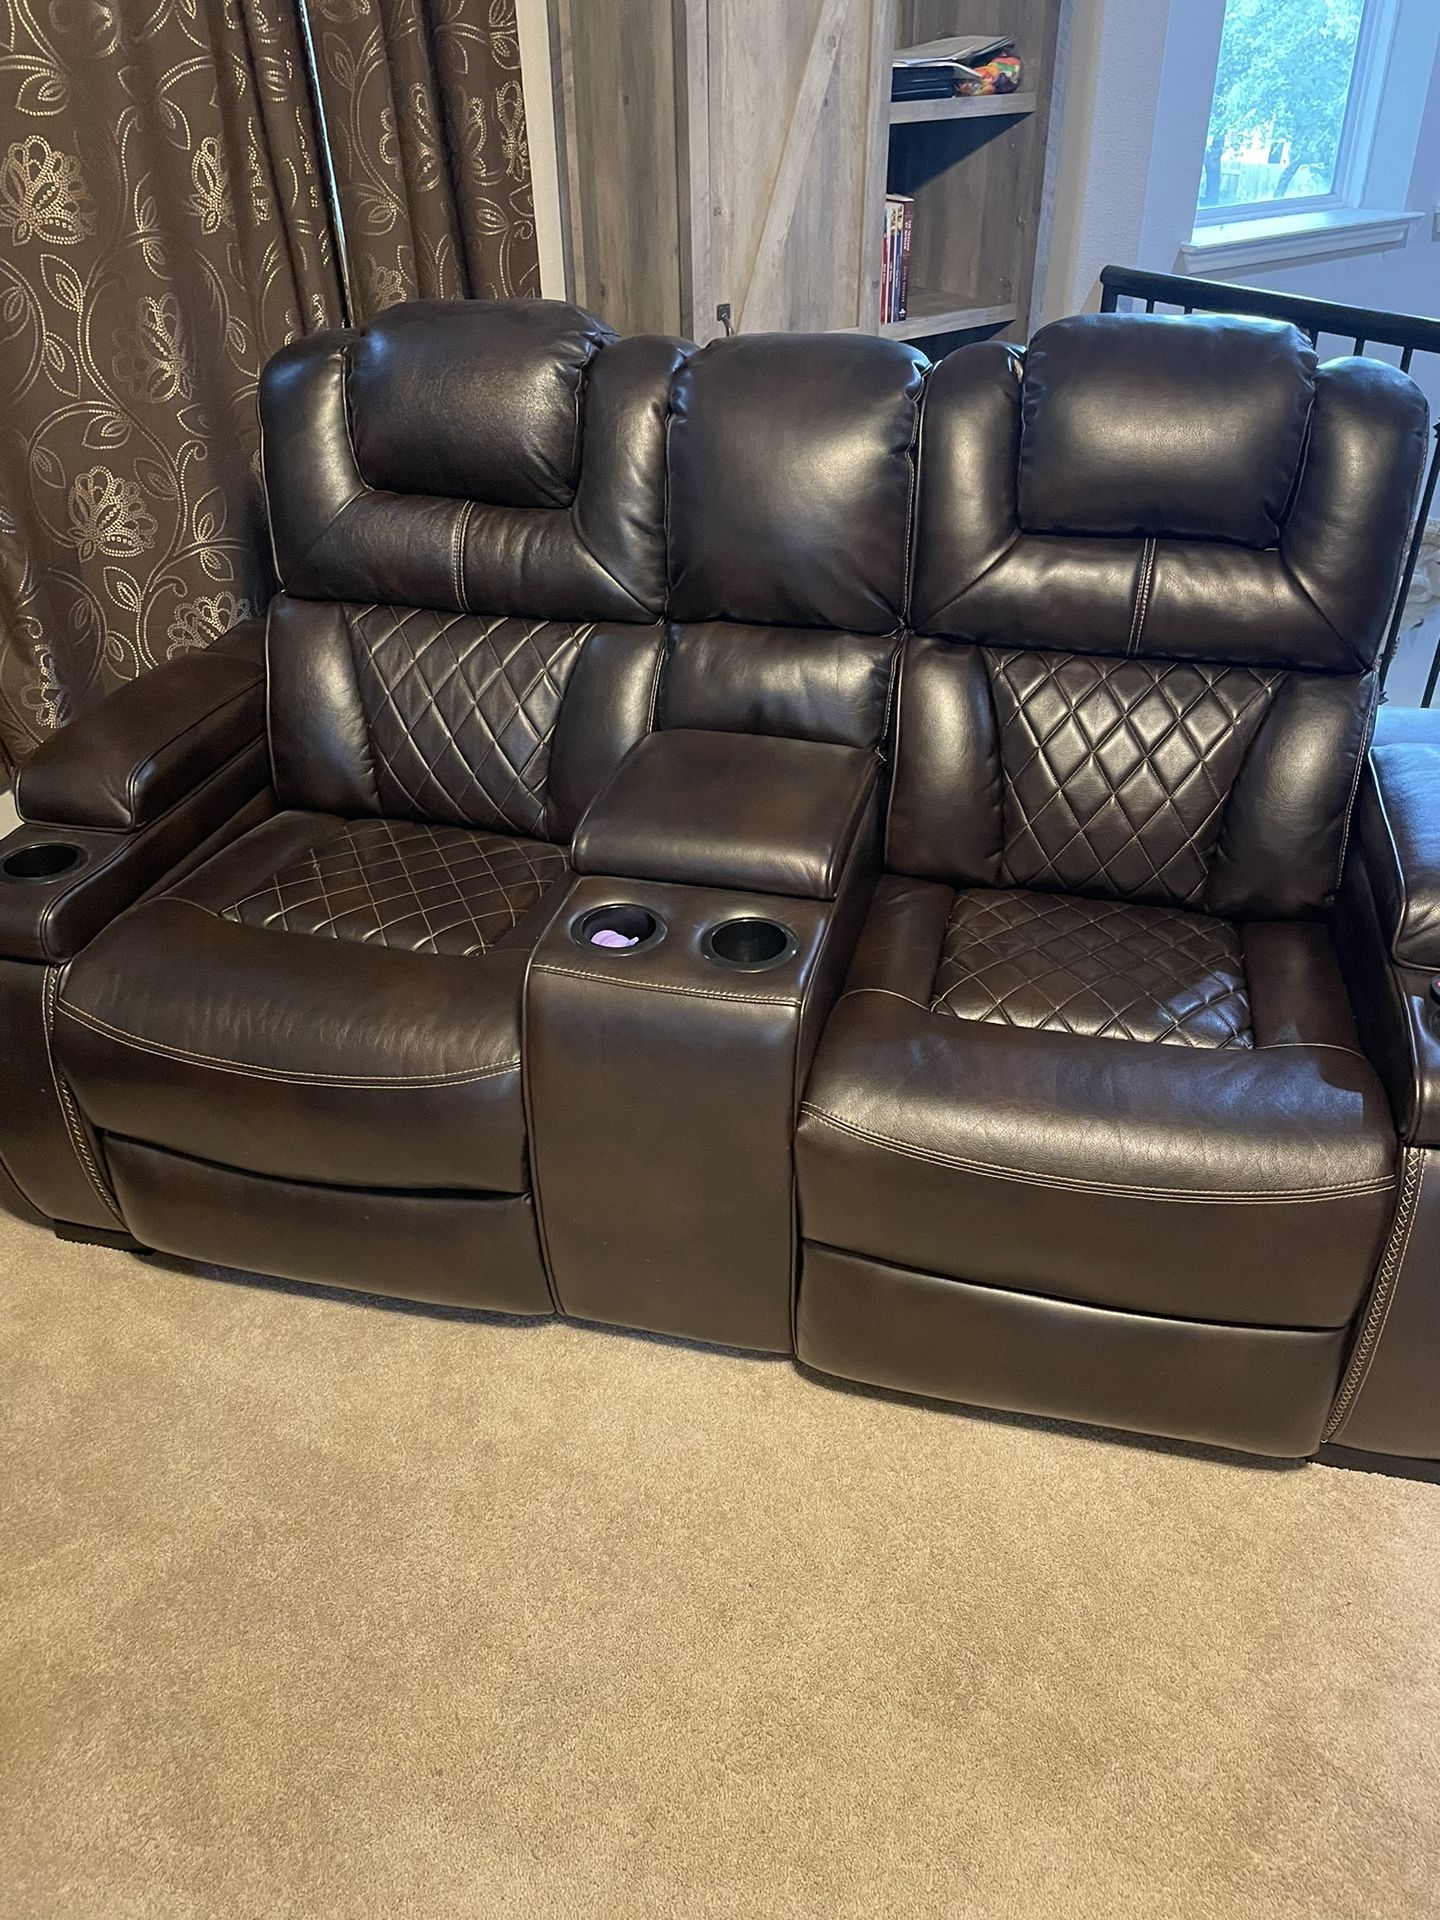 Dual Sofa Recliners, Leather